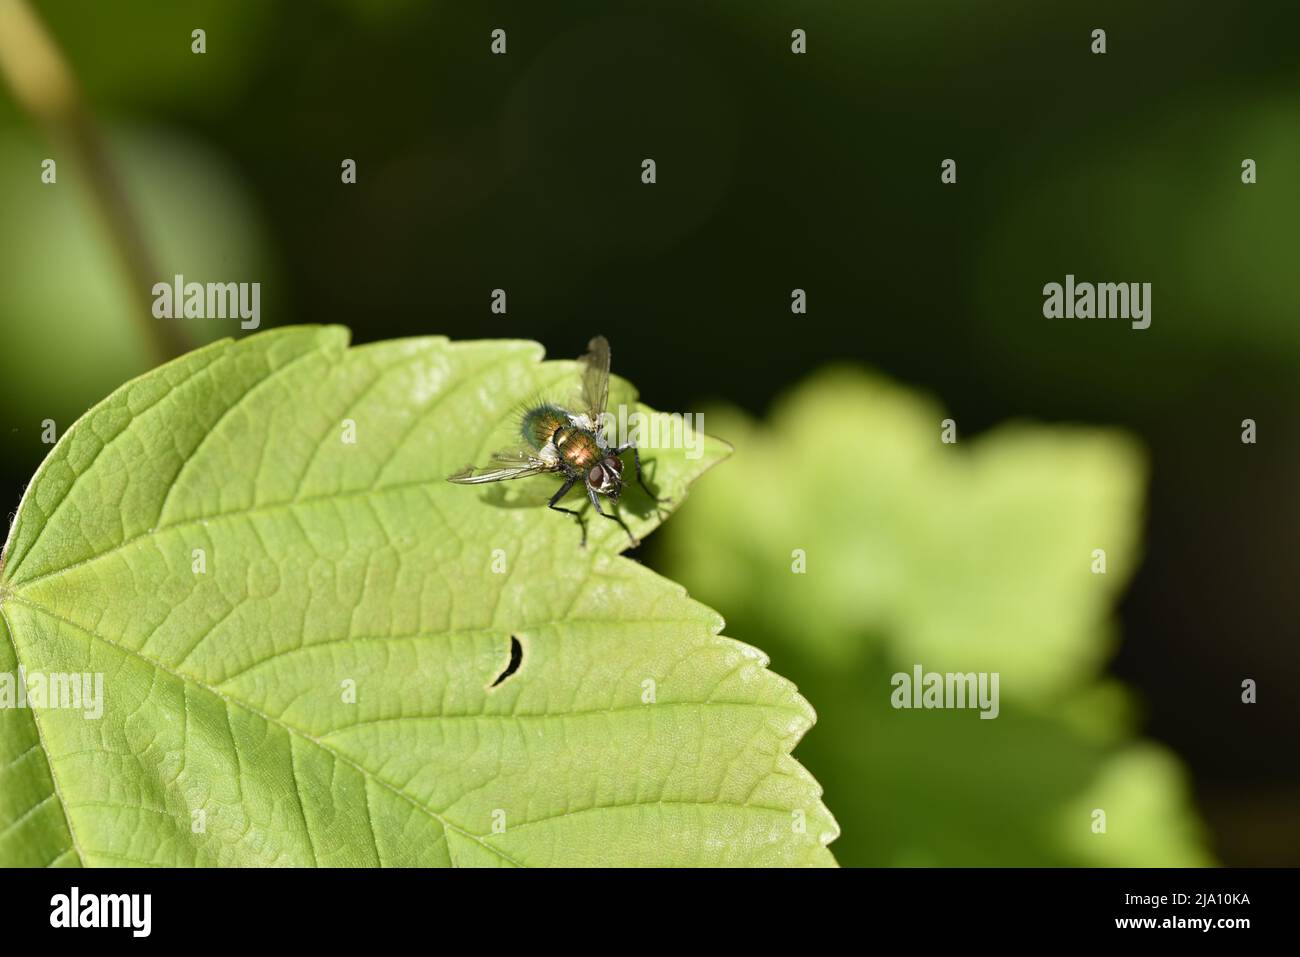 Macro Image of a Greenbottle Blow-Fly (Lucilia caesar) Facing Camera From a Green Leaf in the Sun, Against a Dark Background, in Wales, UK in Spring Stock Photo